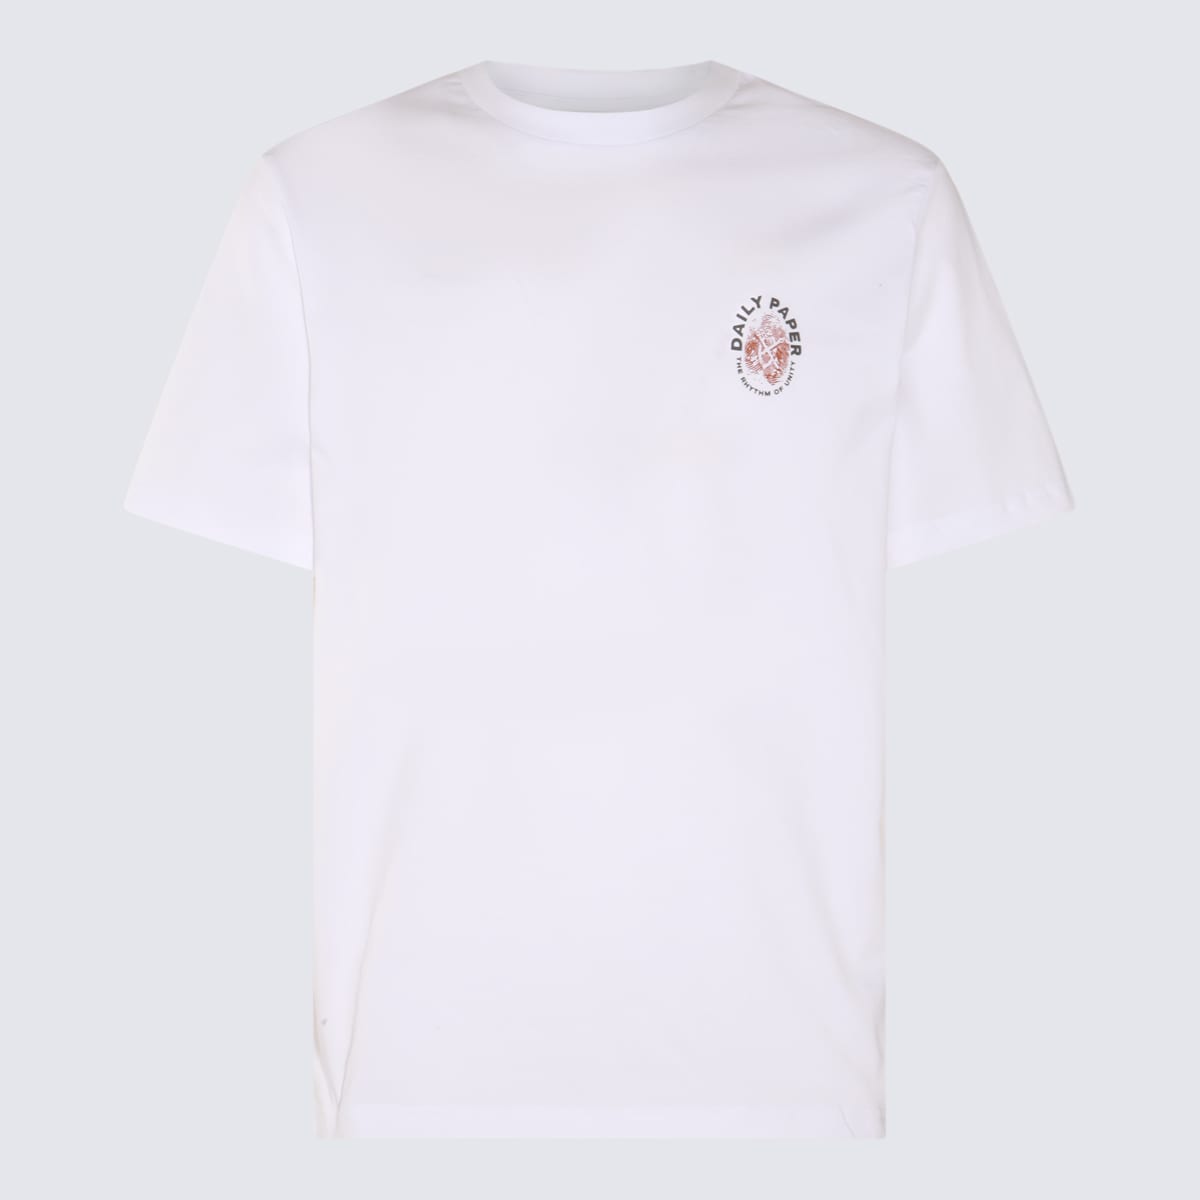 Daily Paper White Cotton T-shirt